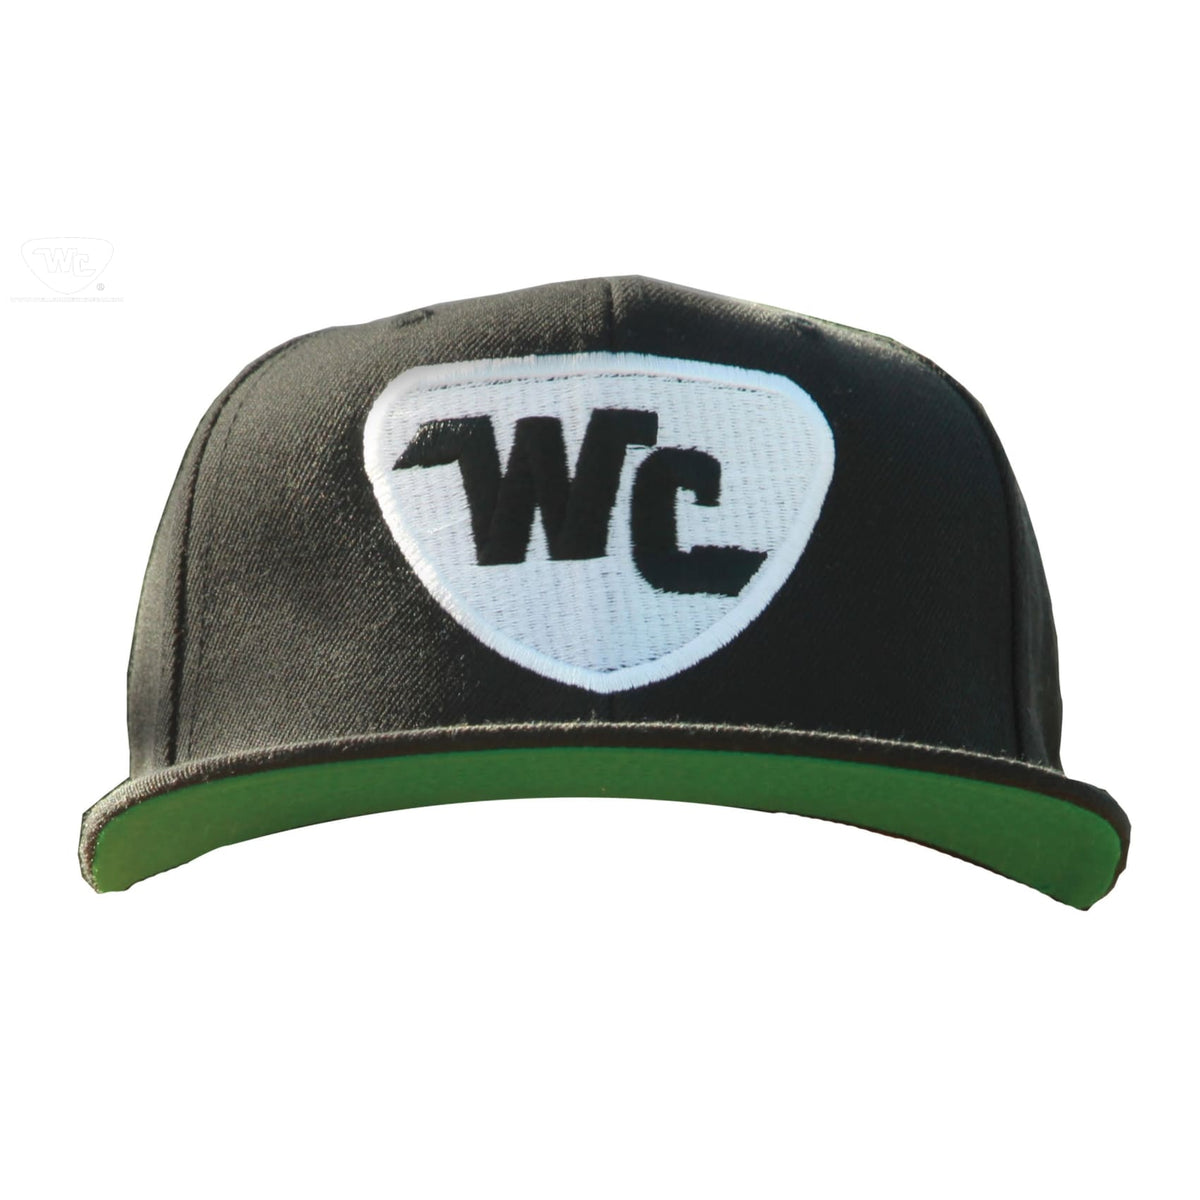 Gear - (Black) Well Lifestyle Cap Connected Snapback